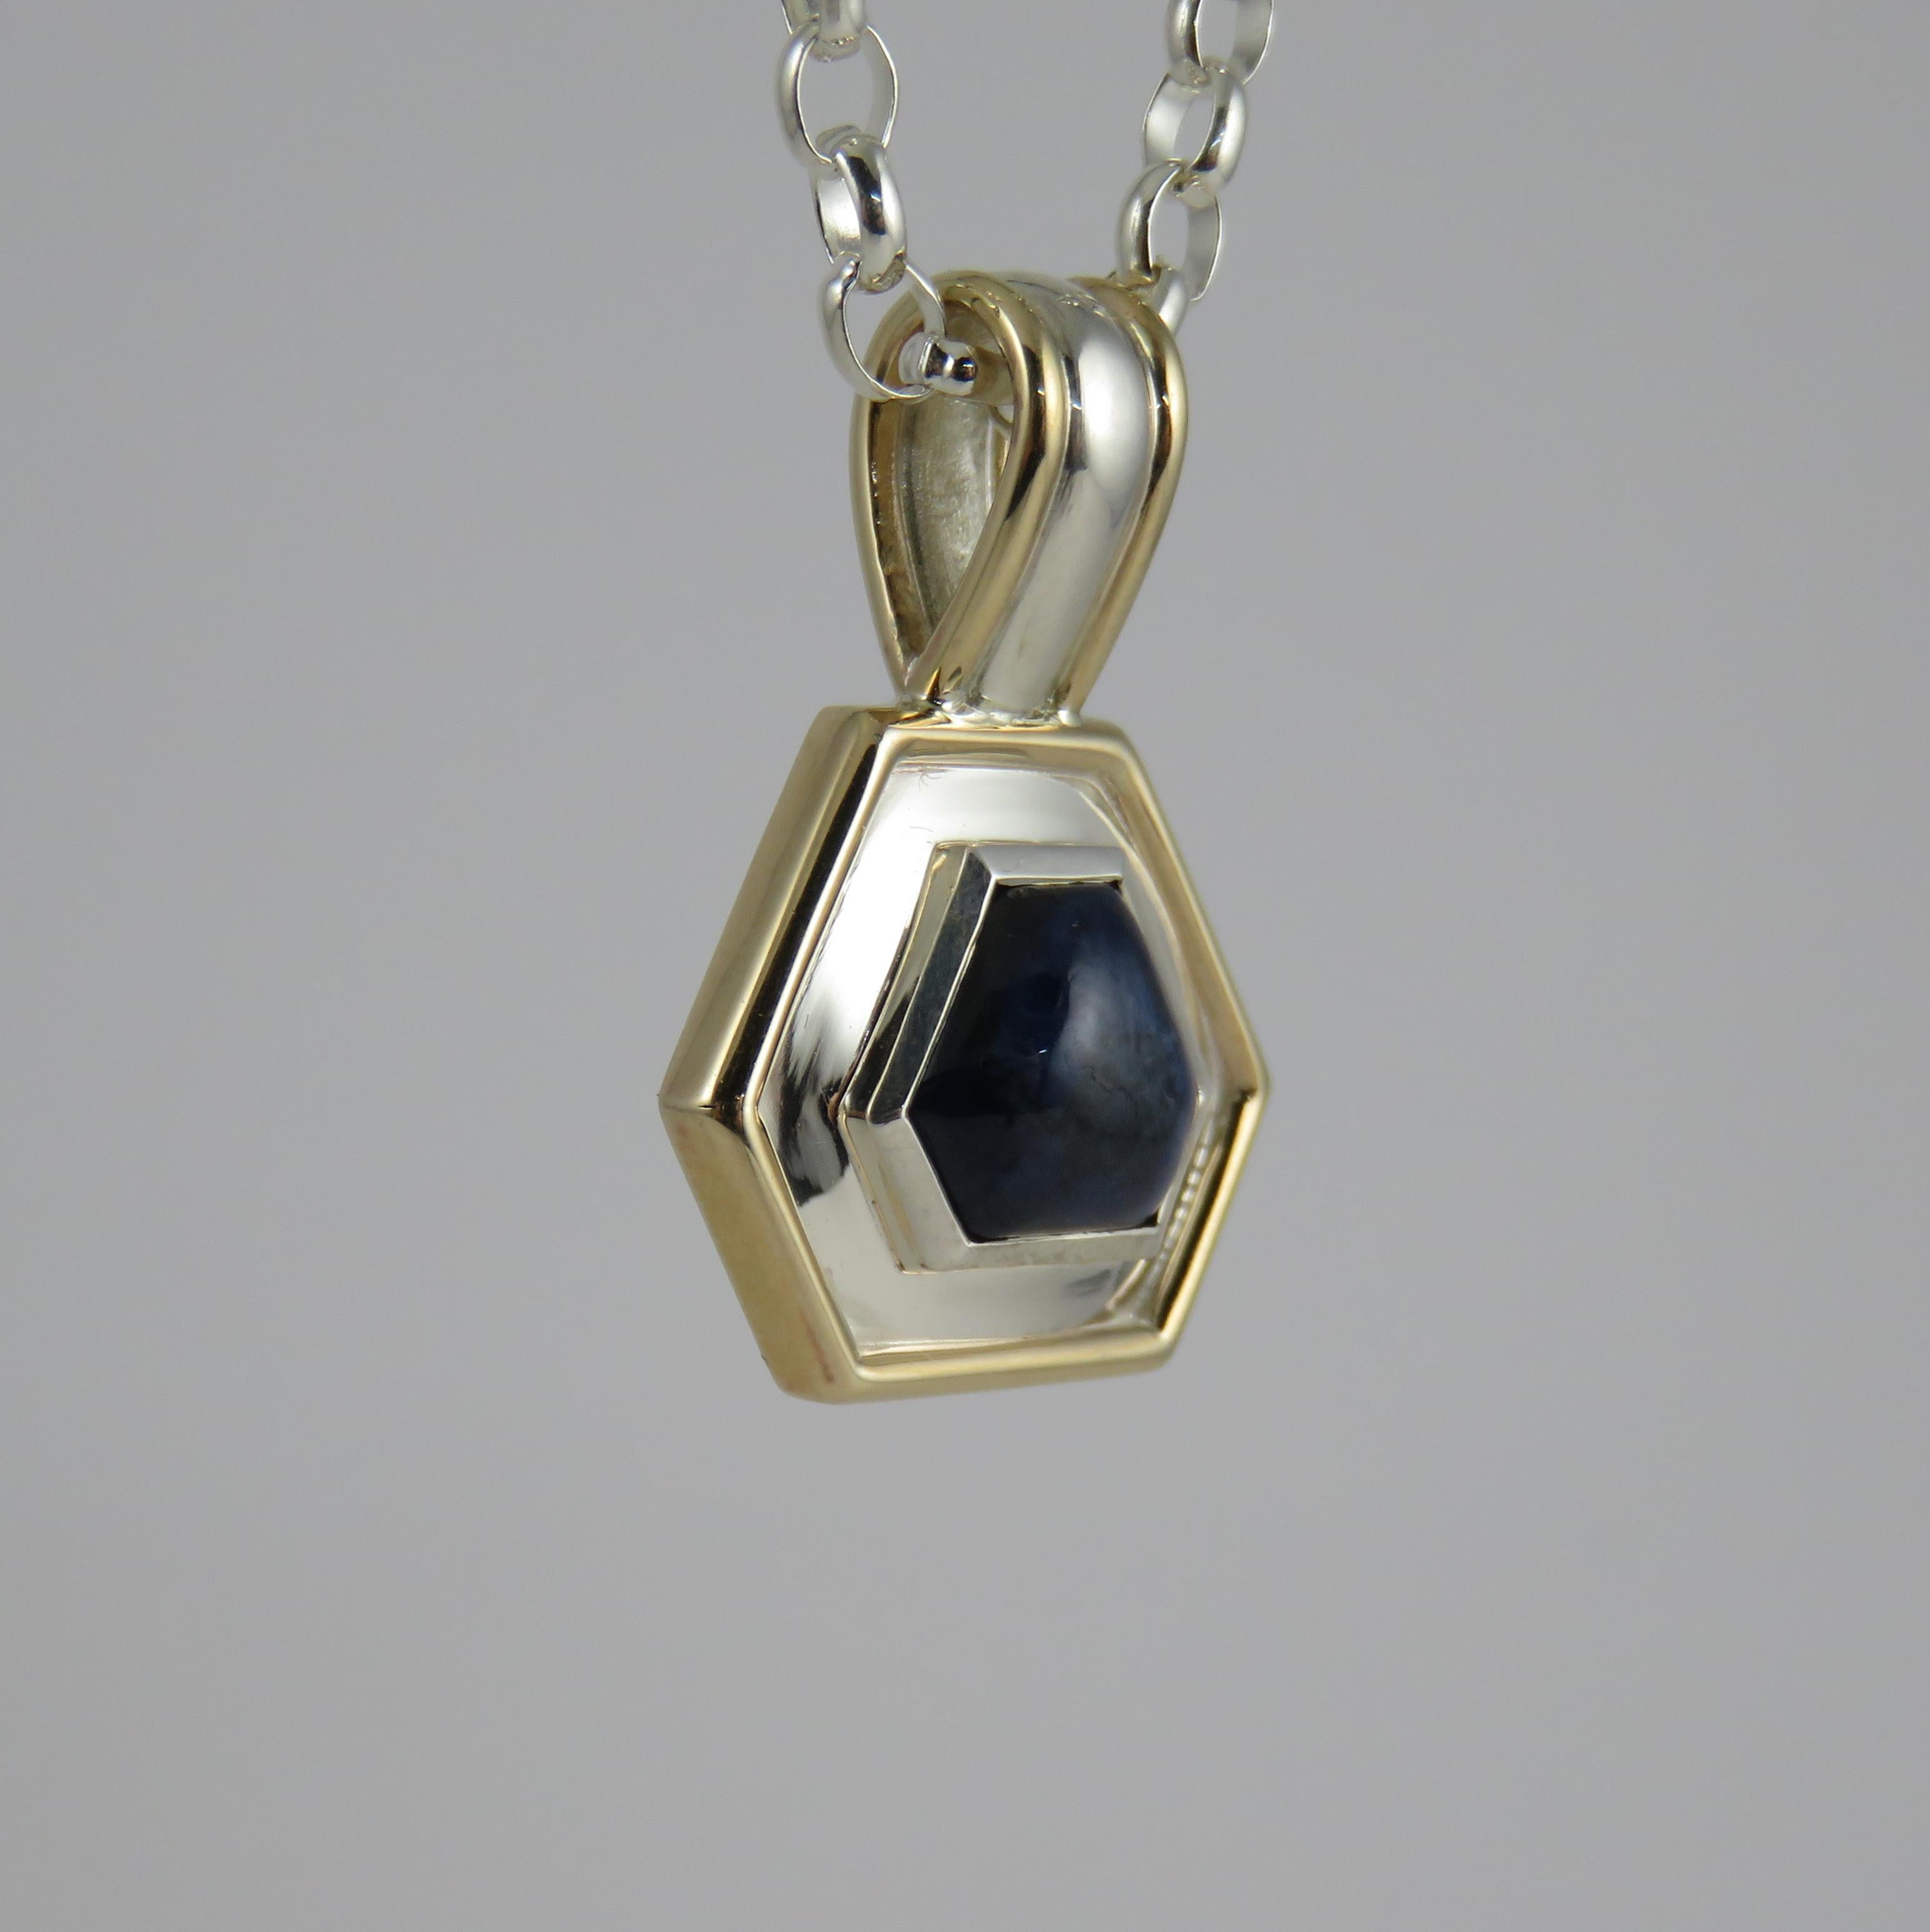 Small but perfectly formed, this beautiful and unique piece of jewelry combines sterling silver and 9k yellow gold, along with a blue cabochon sapphire, creates an interesting contrast. The use of two-tone metals adds visual interest and depth to